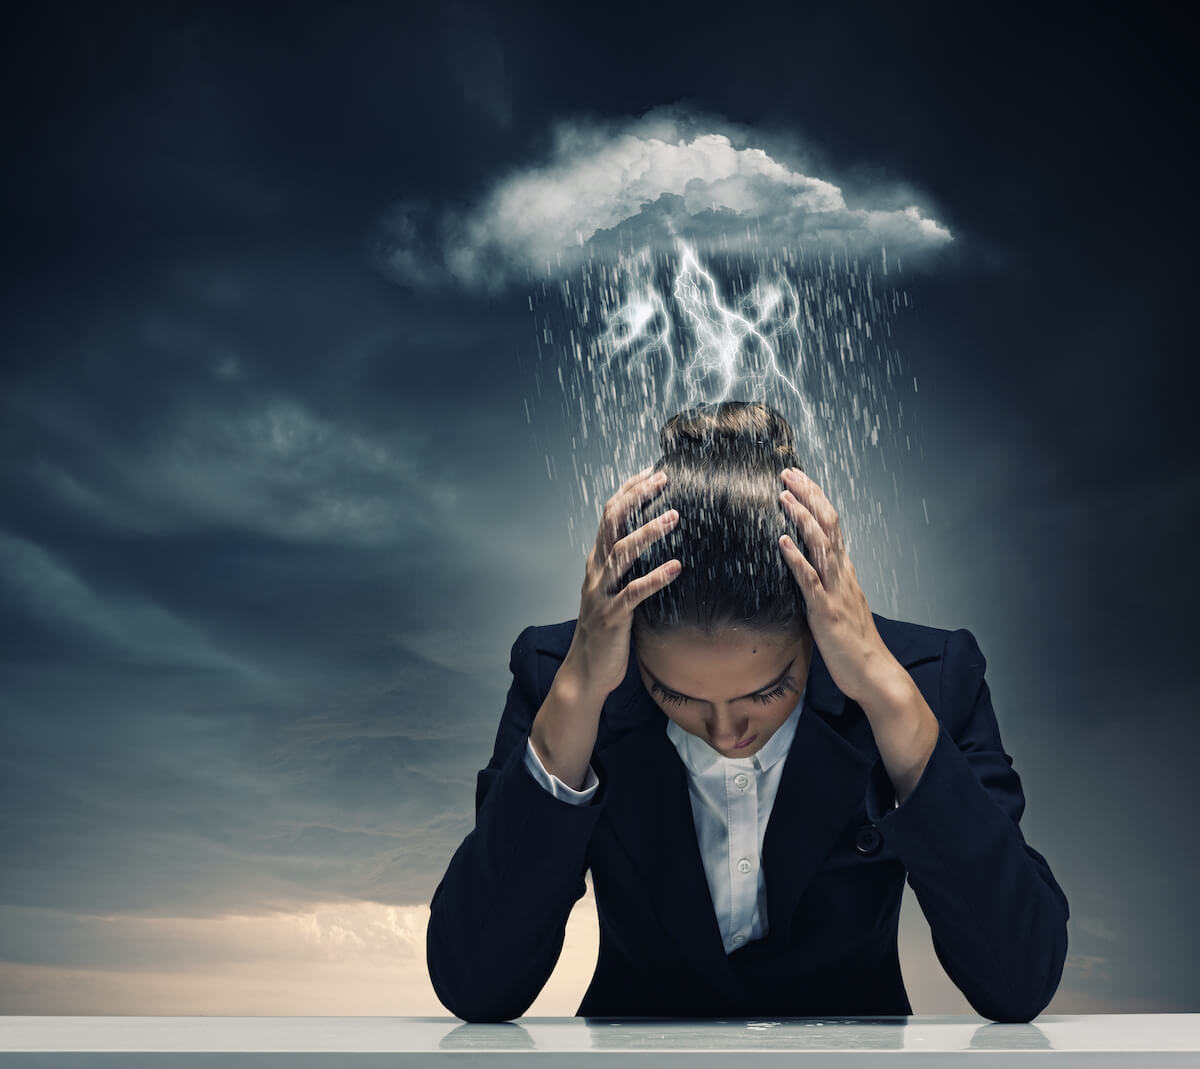 anxiety ridden business woman leaning over a desk with hands in her head and a stormy cloud above seeking relief from her anxiety